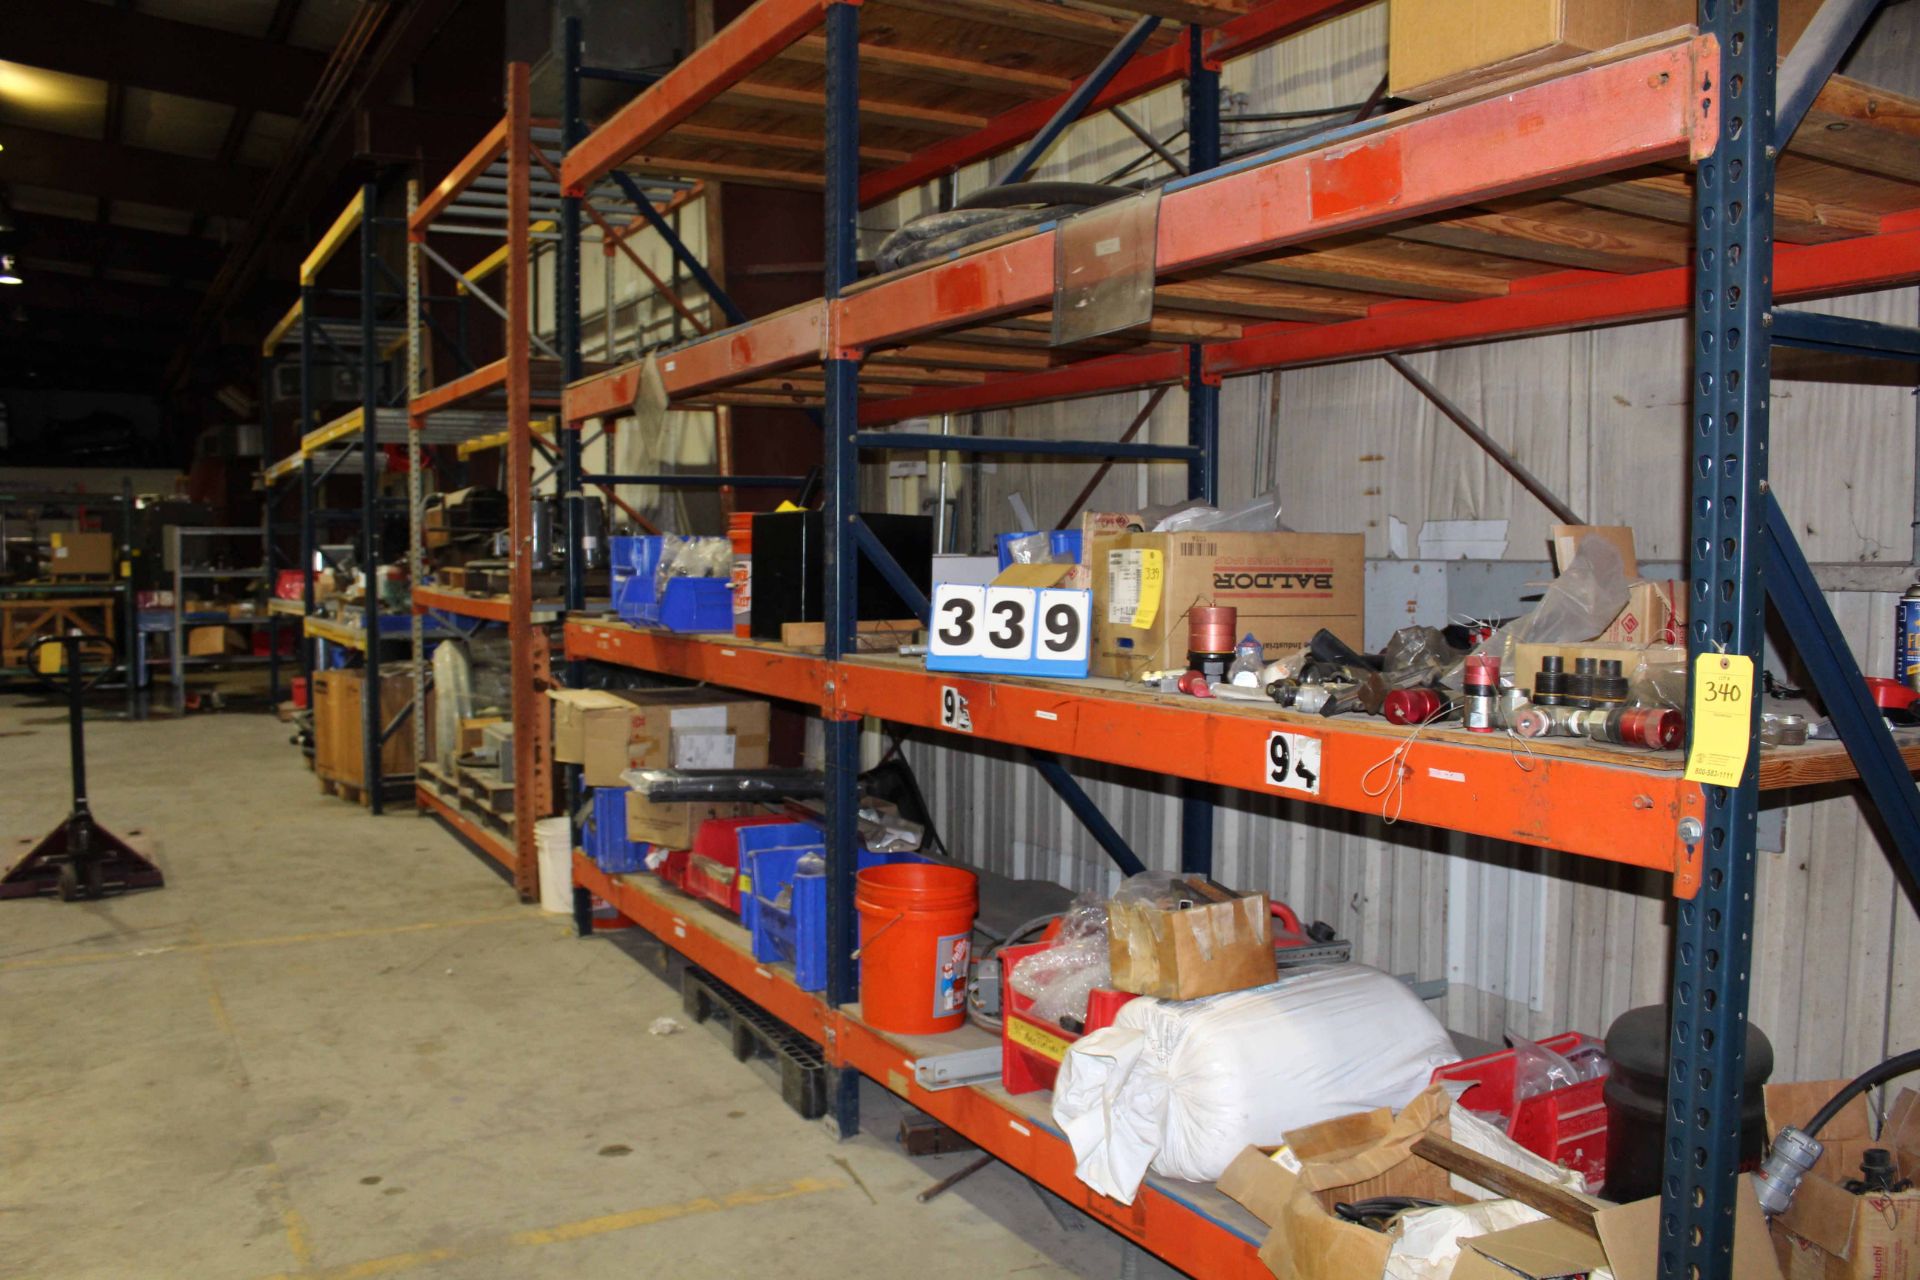 LOT CONSISTING OF: contents on five sections of pallet racks (caps, fittings, QD's, pump filters,